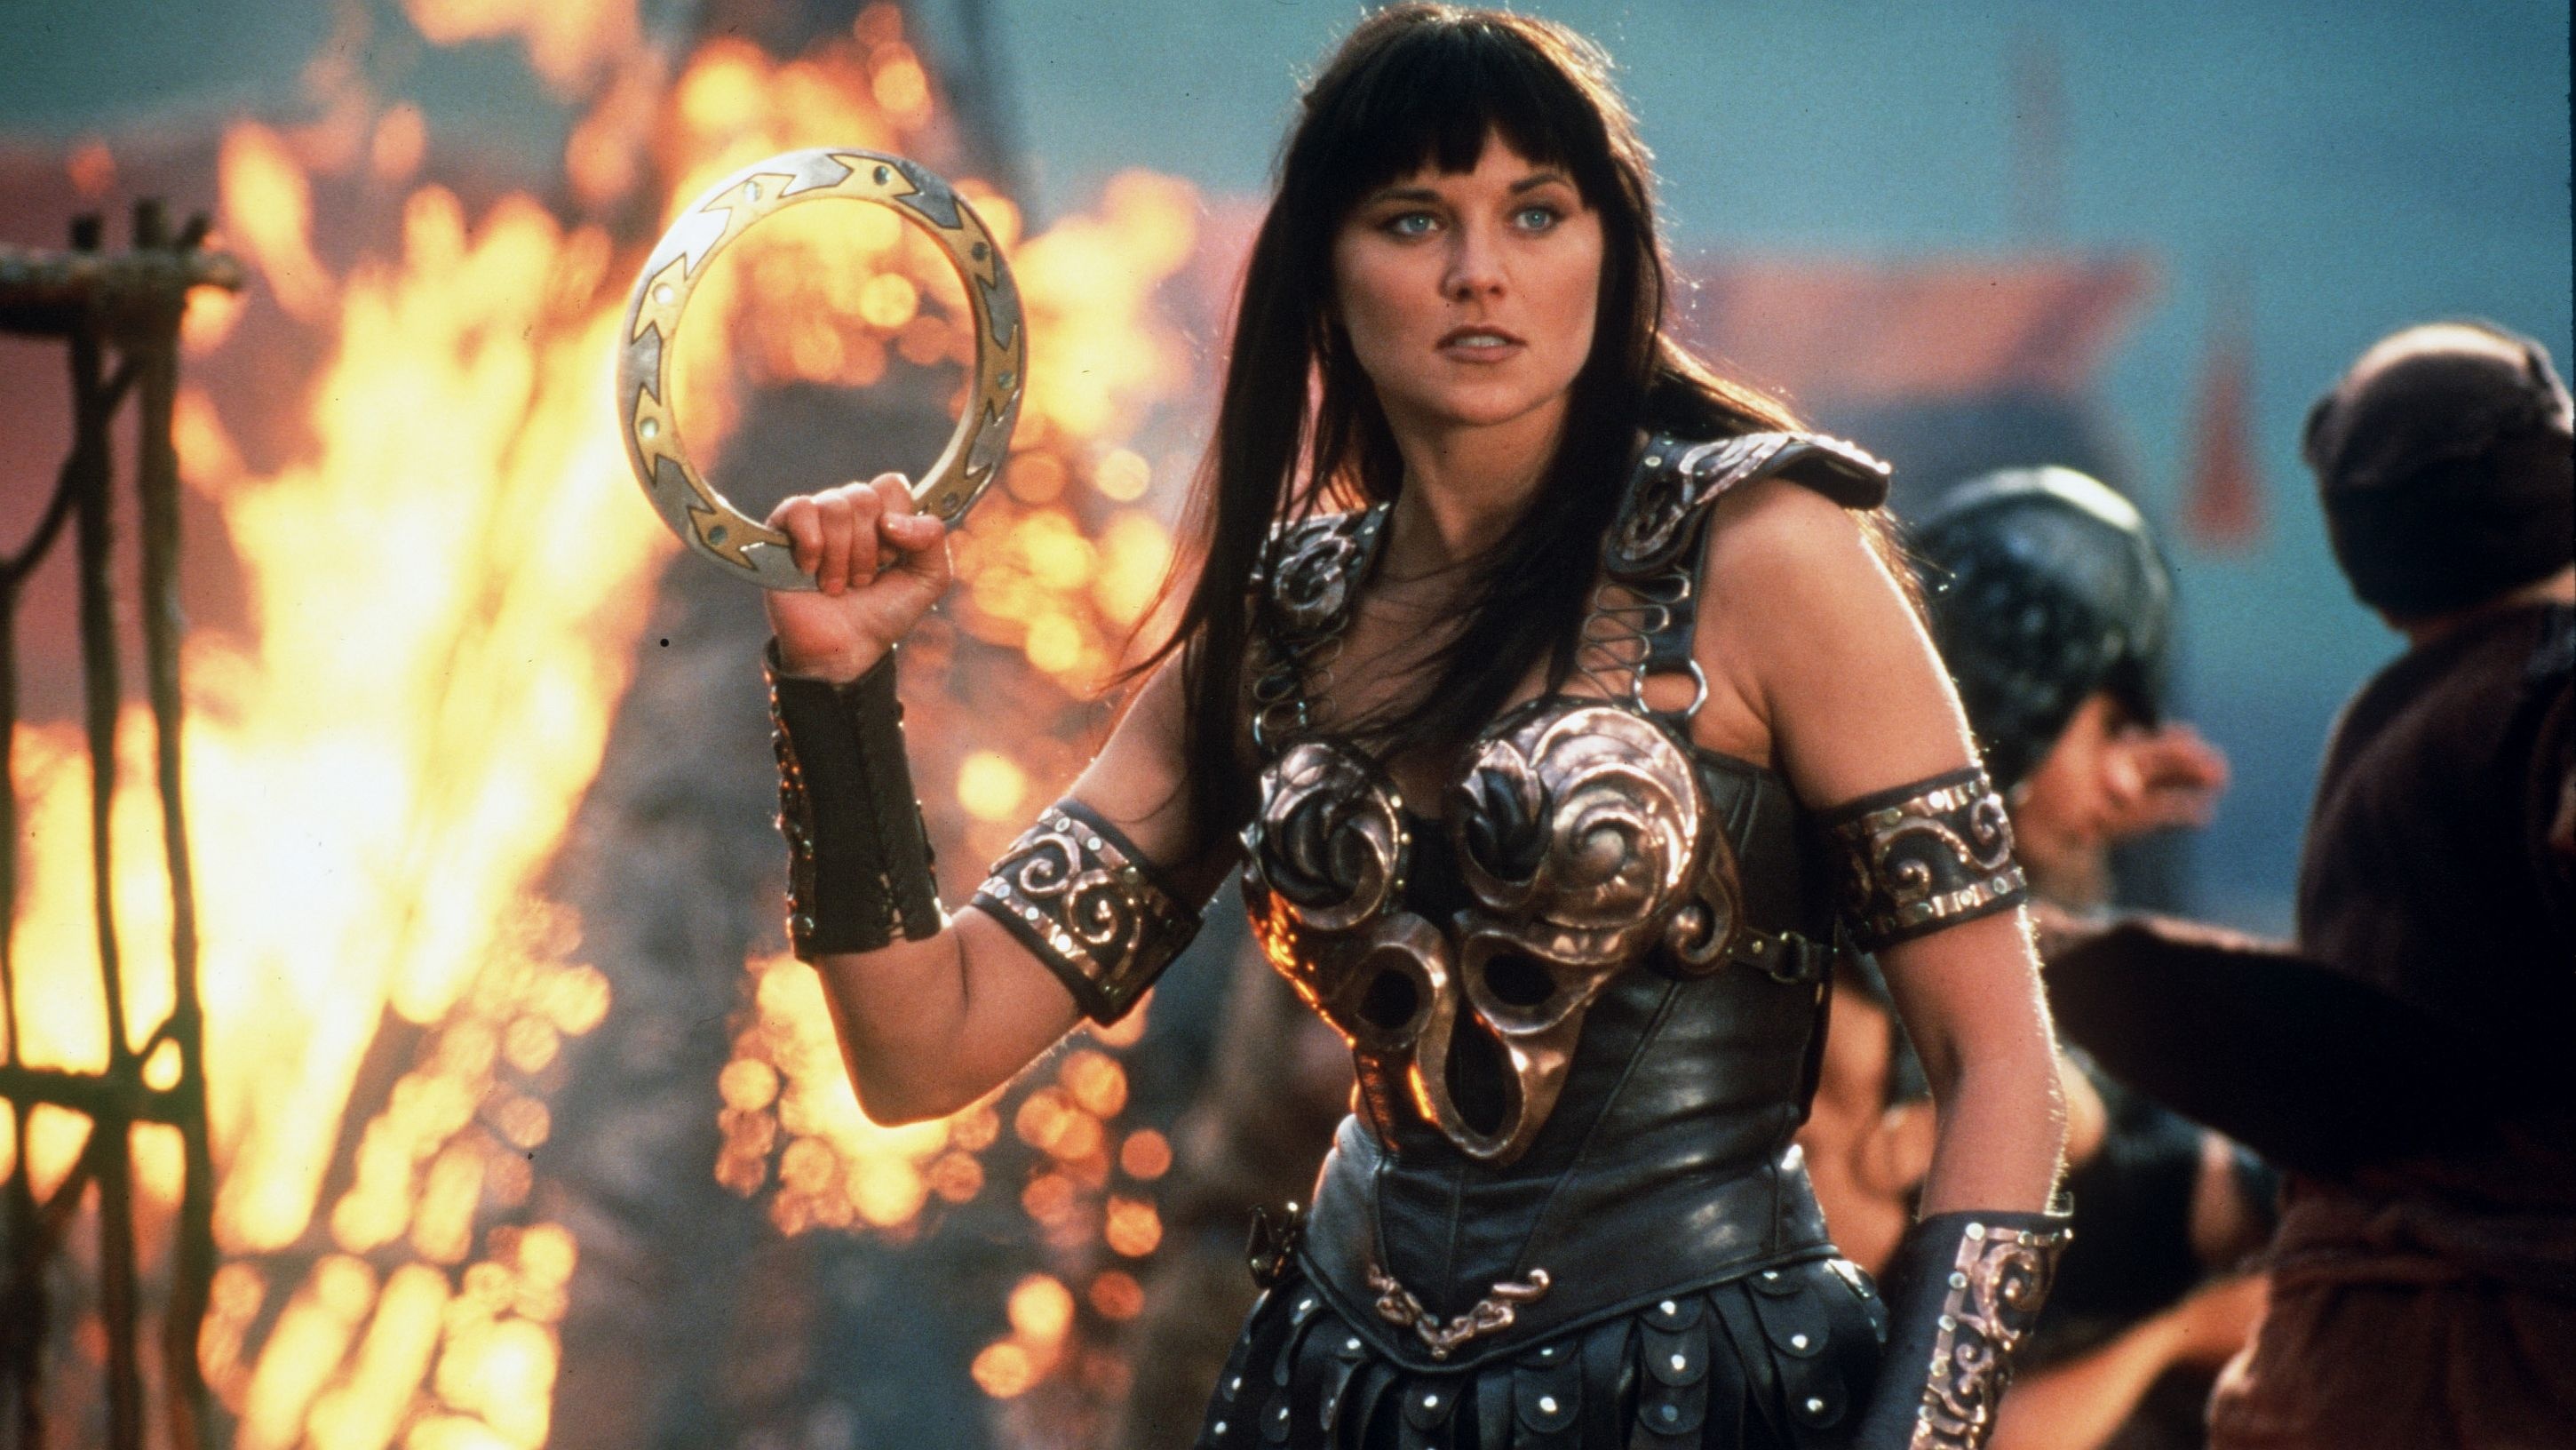 Xena: Warrior Princess (TV Series): The protagonist of the story played by Lucy Lawless. 2900x1640 HD Wallpaper.